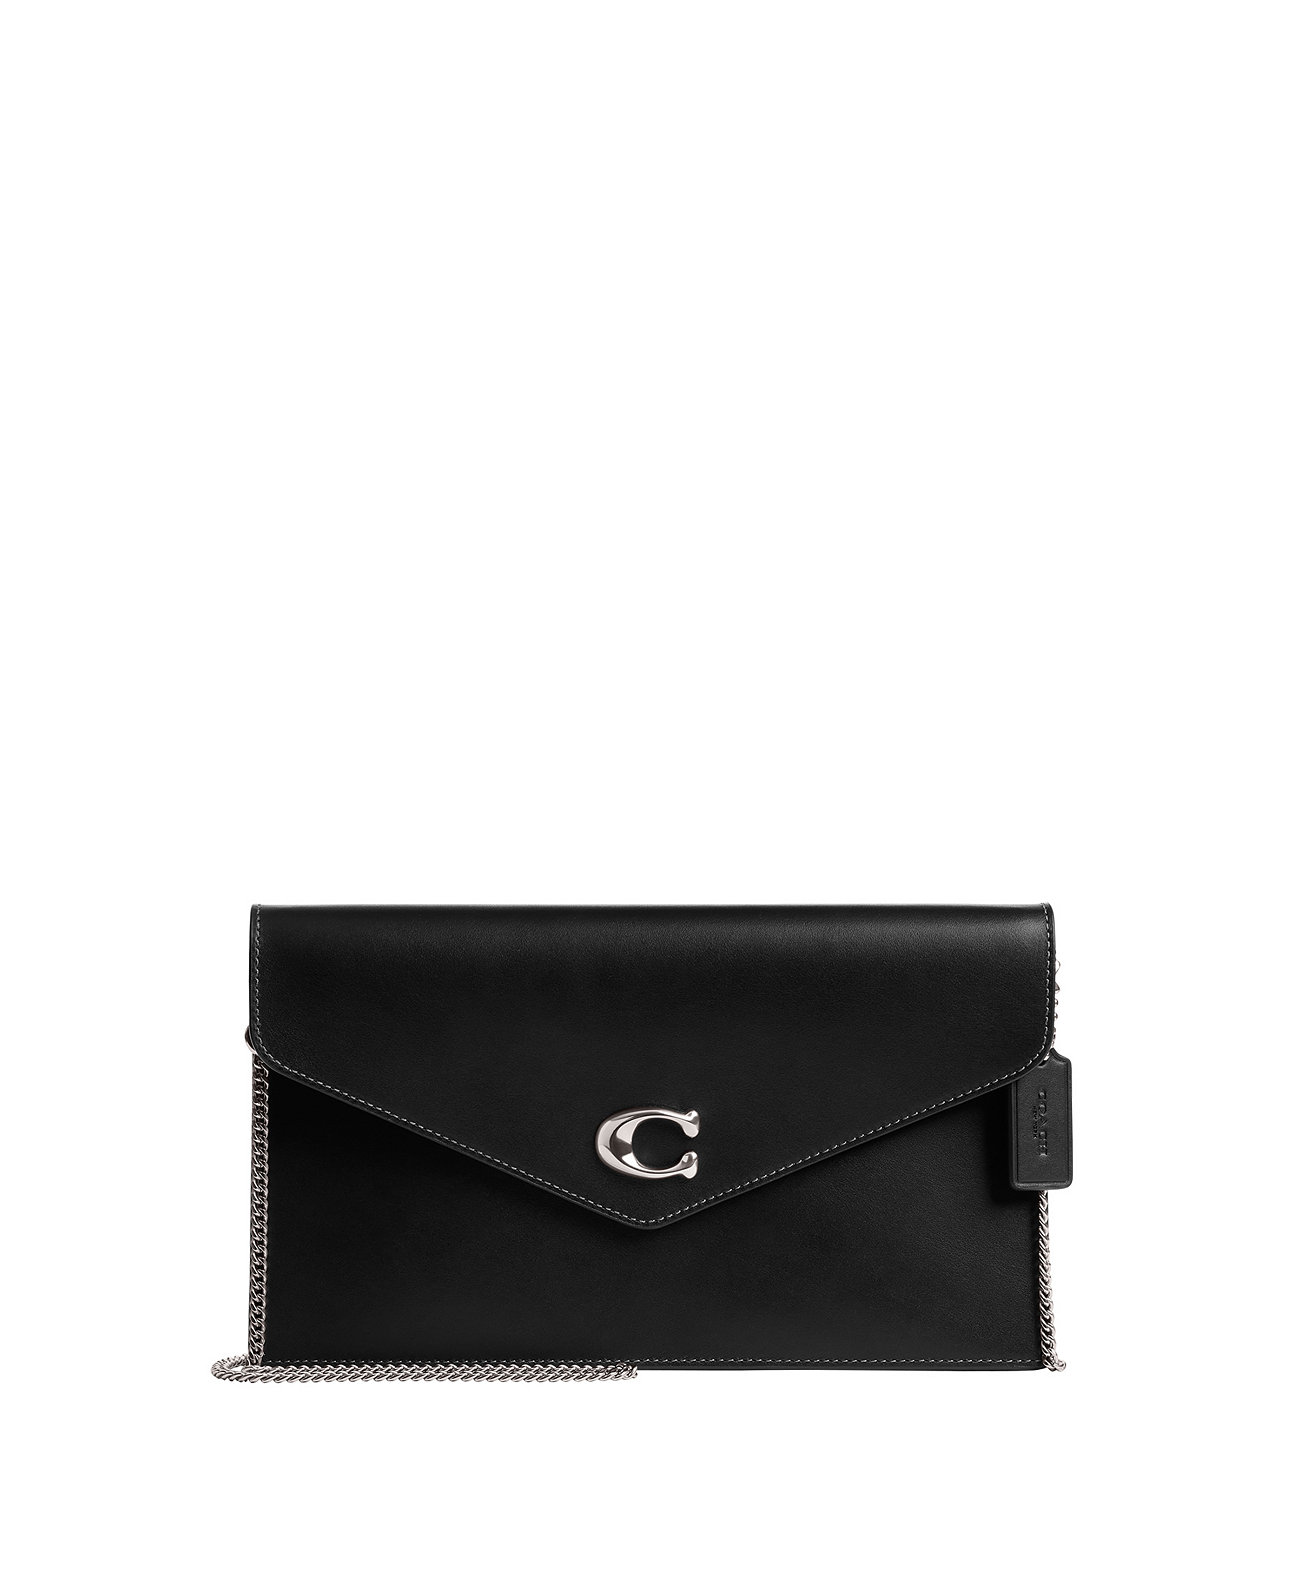 Women's Essential Small Leather Clutch COACH